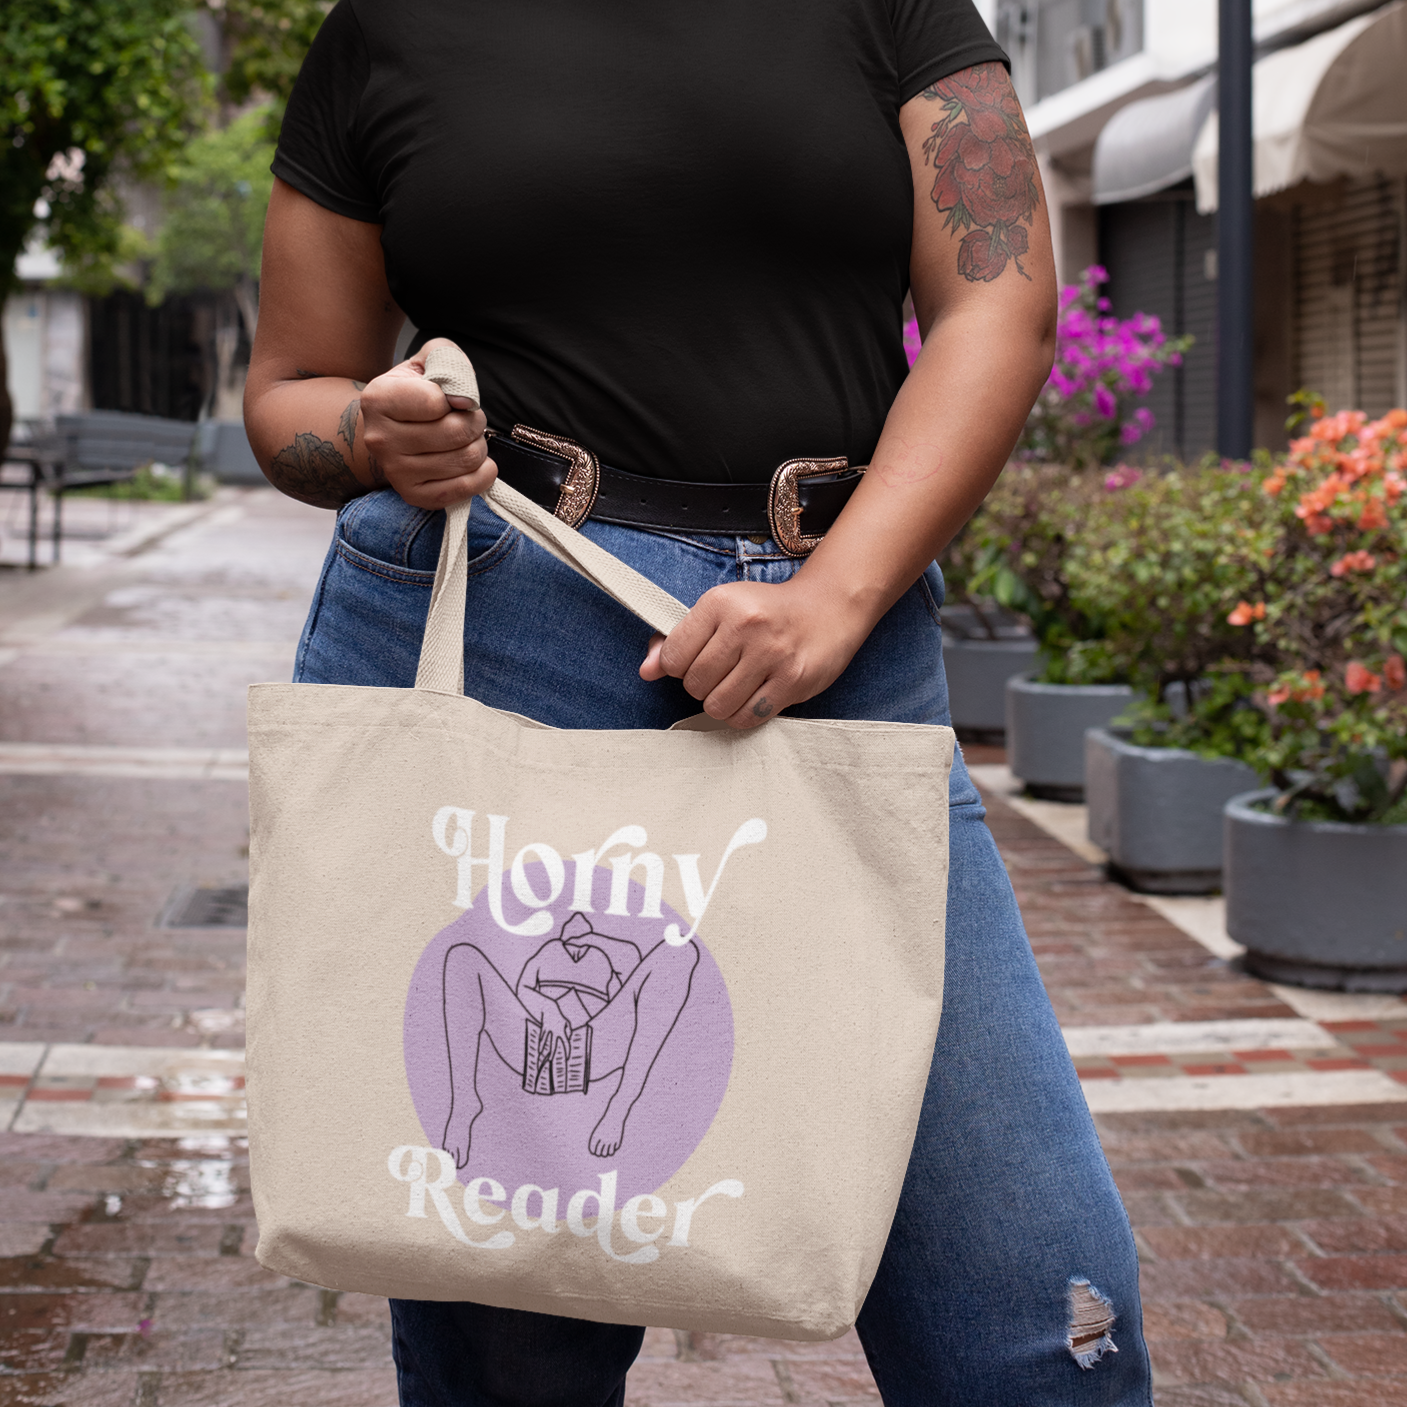 Romance book tote bag that reads Horny reader for smutty book lovers